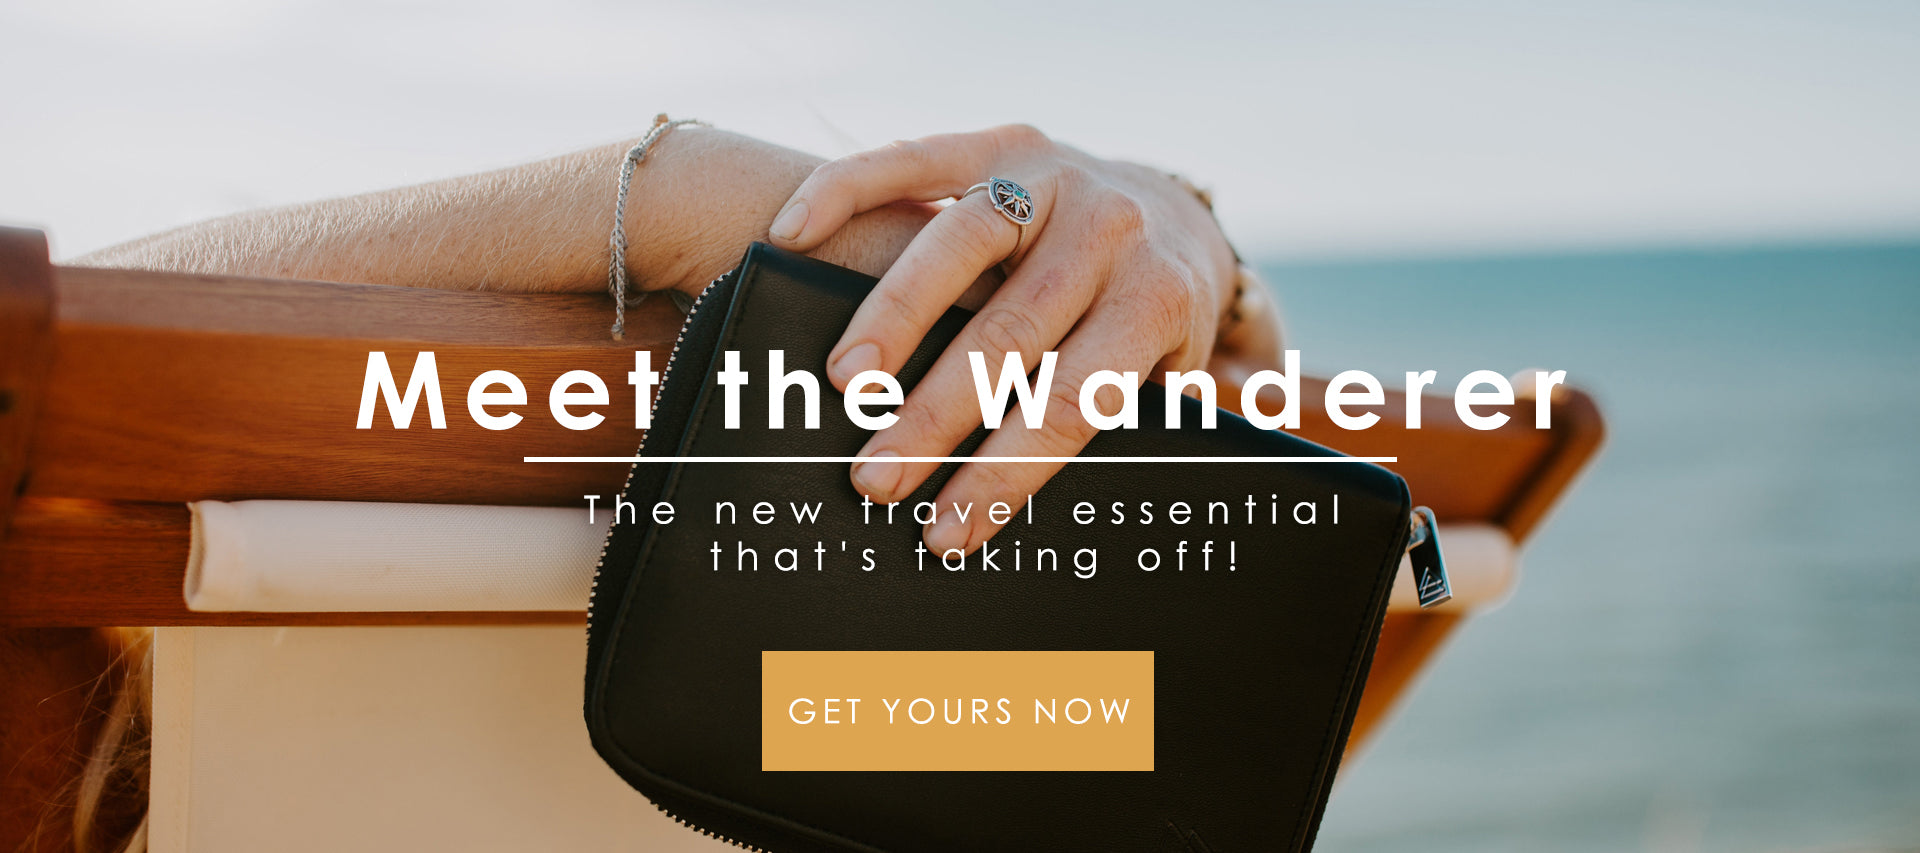 The Wanderer Travel Jewelry Case